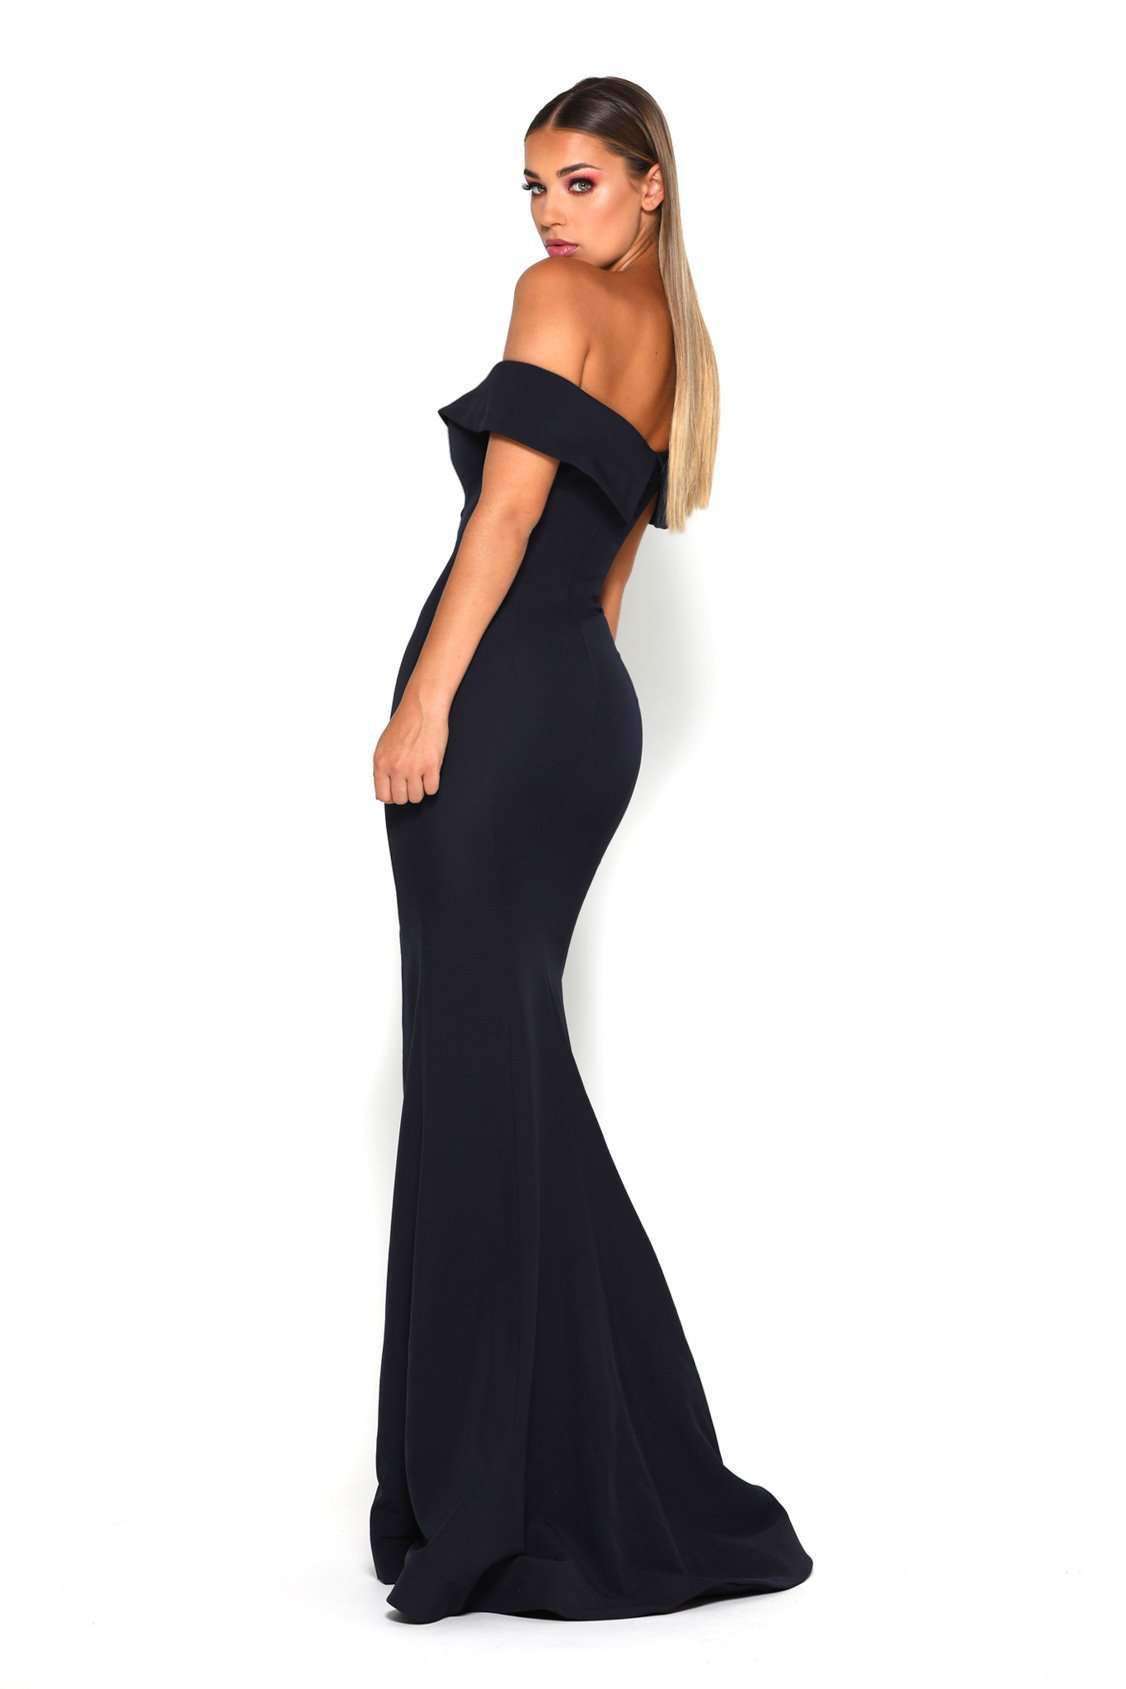 Portia and Scarlett Rebecca Gown Dress | Buy Designer Gowns & Evening ...